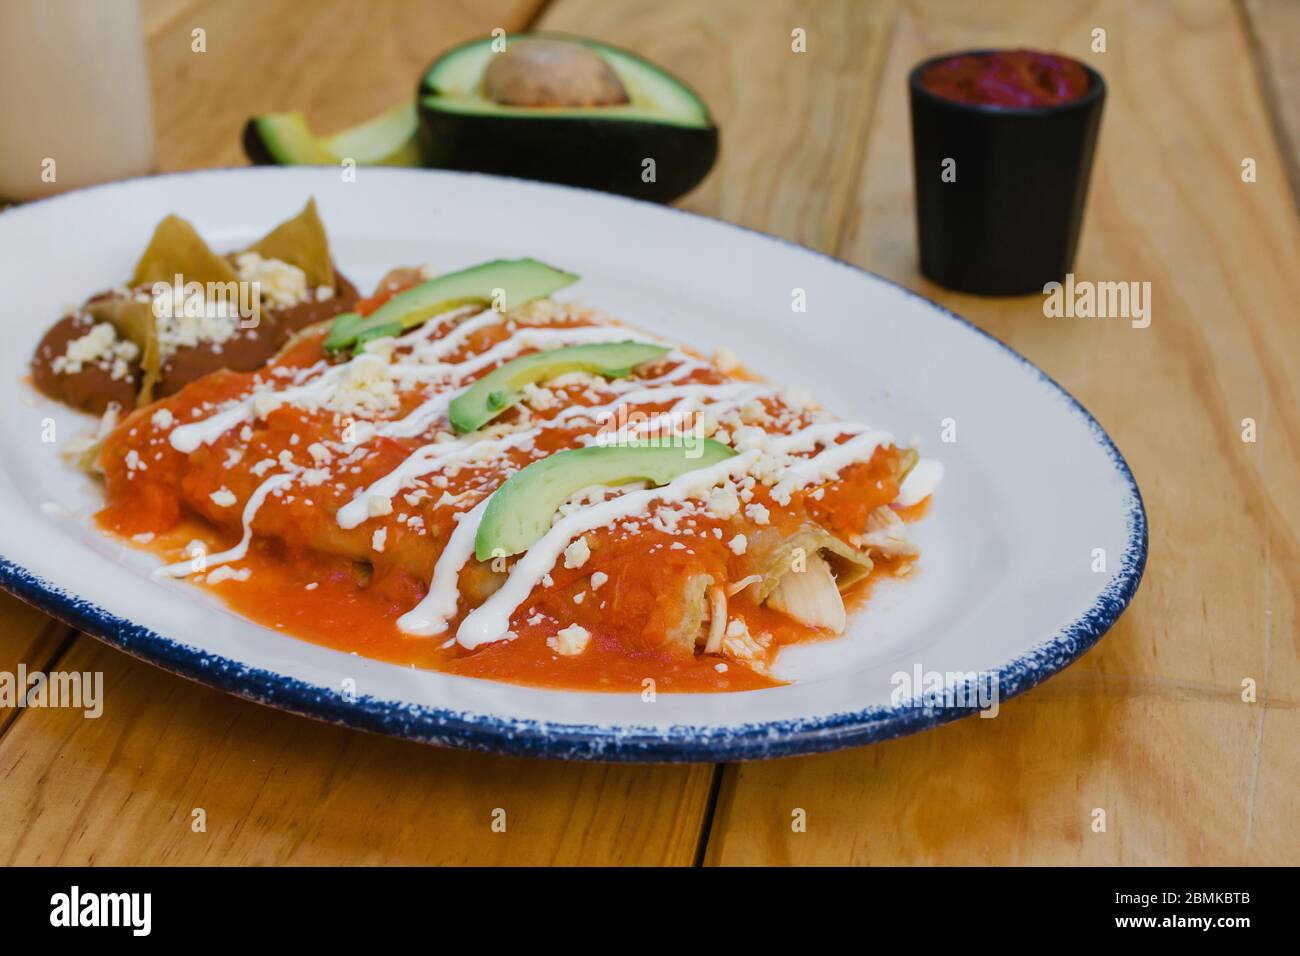 red enchiladas mexican food with tomato sauce and cheese in mexico Stock Photo